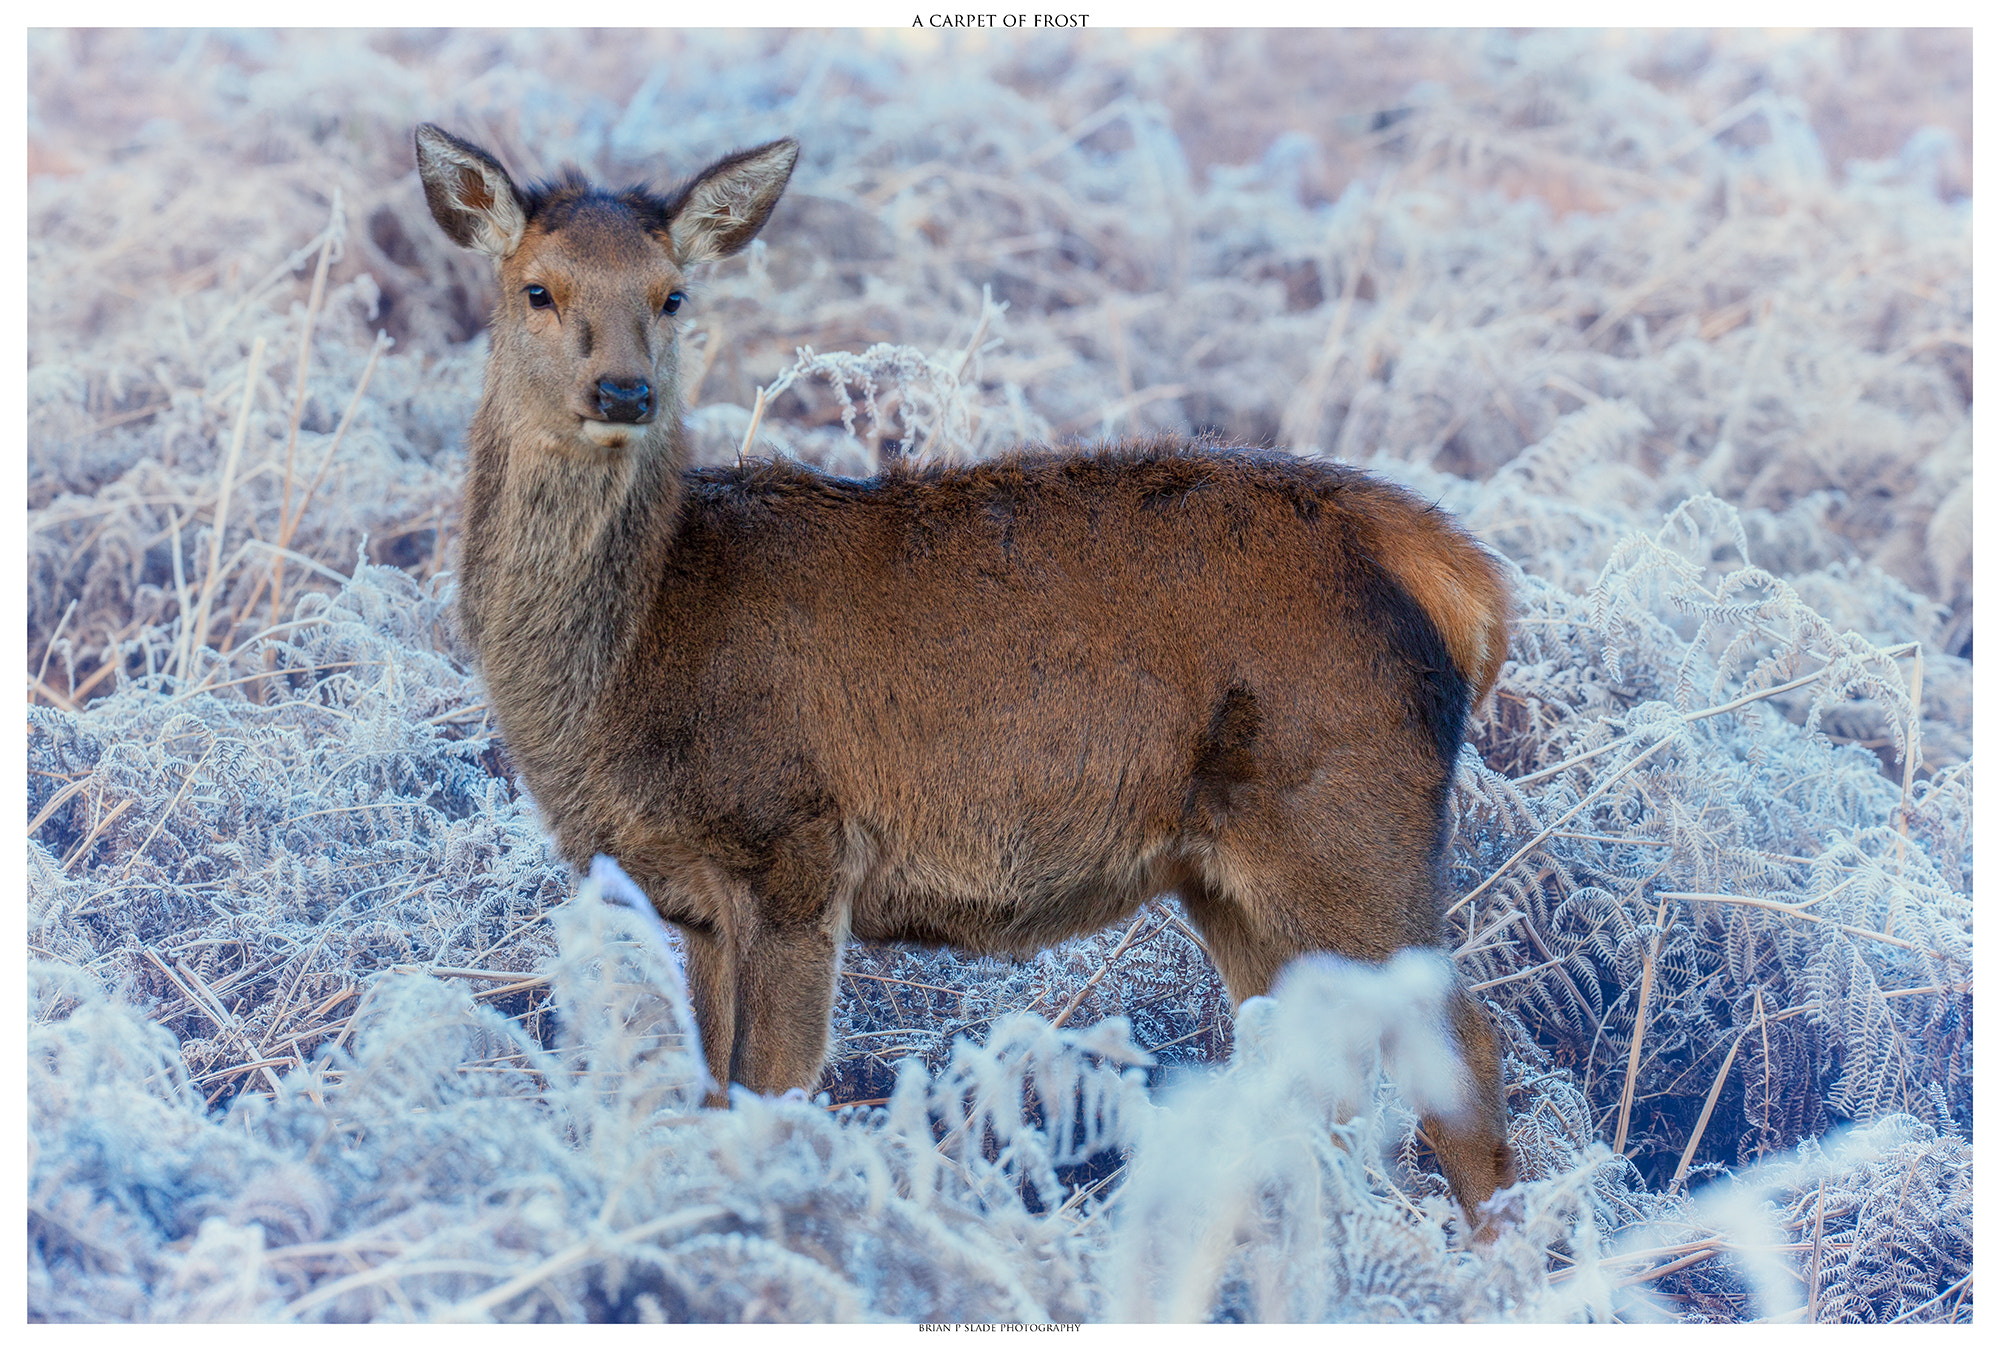 Canon EOS 5D Mark II + Sigma 150-600mm F5-6.3 DG OS HSM | C sample photo. A carpet of frost photography